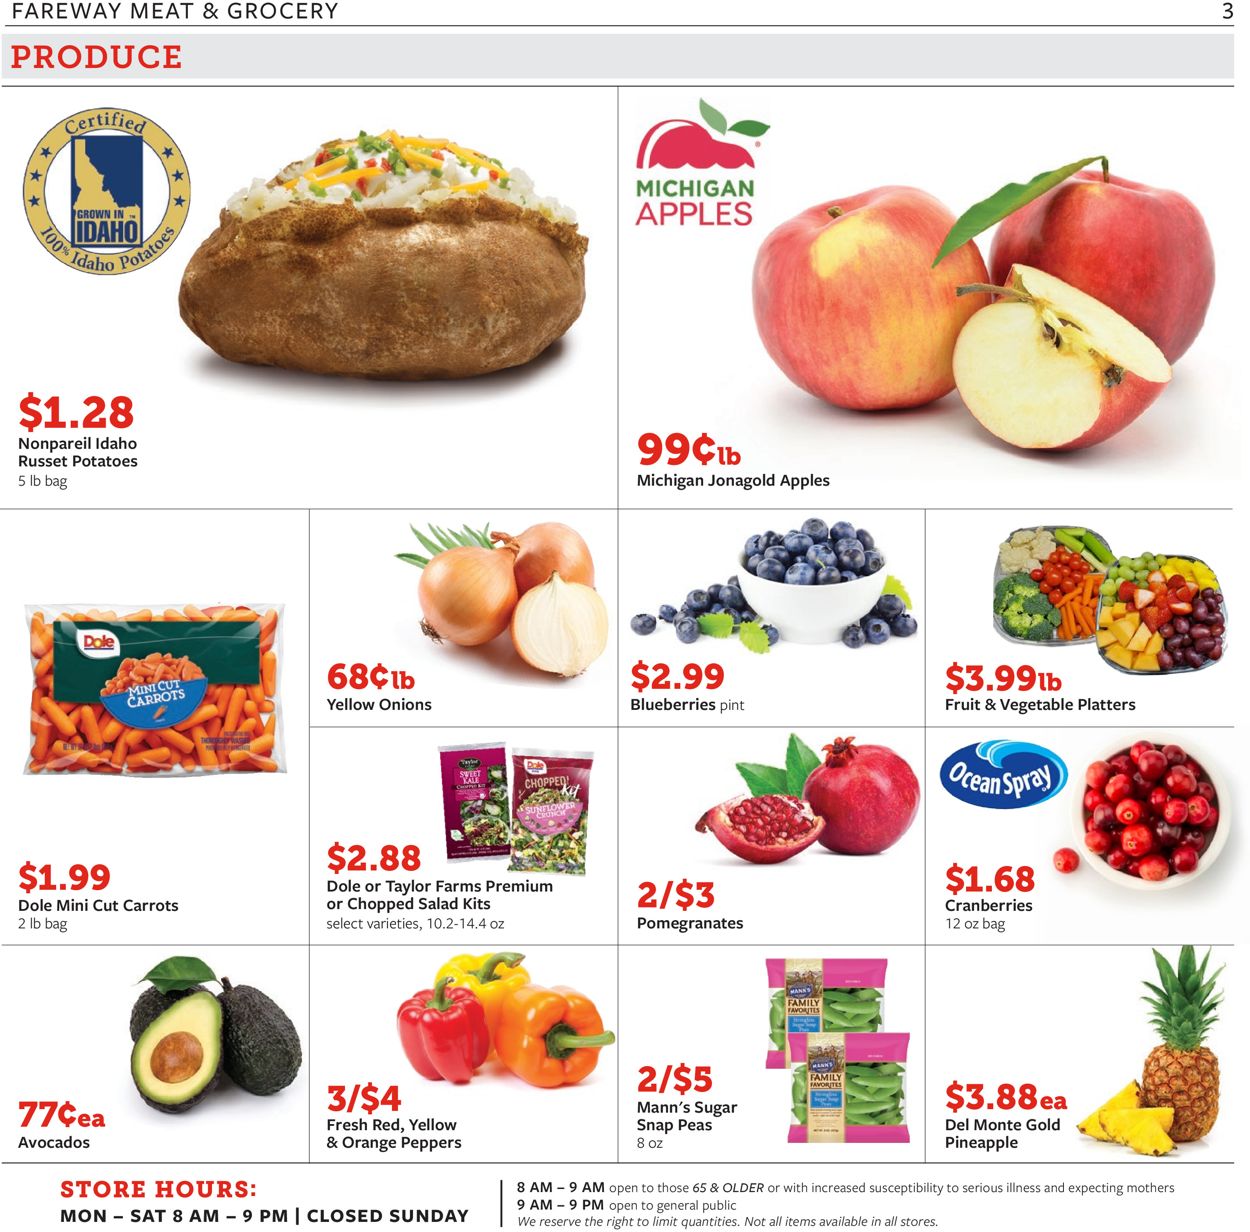 Catalogue Fareway Thanksgiving ad 2020 from 11/17/2020